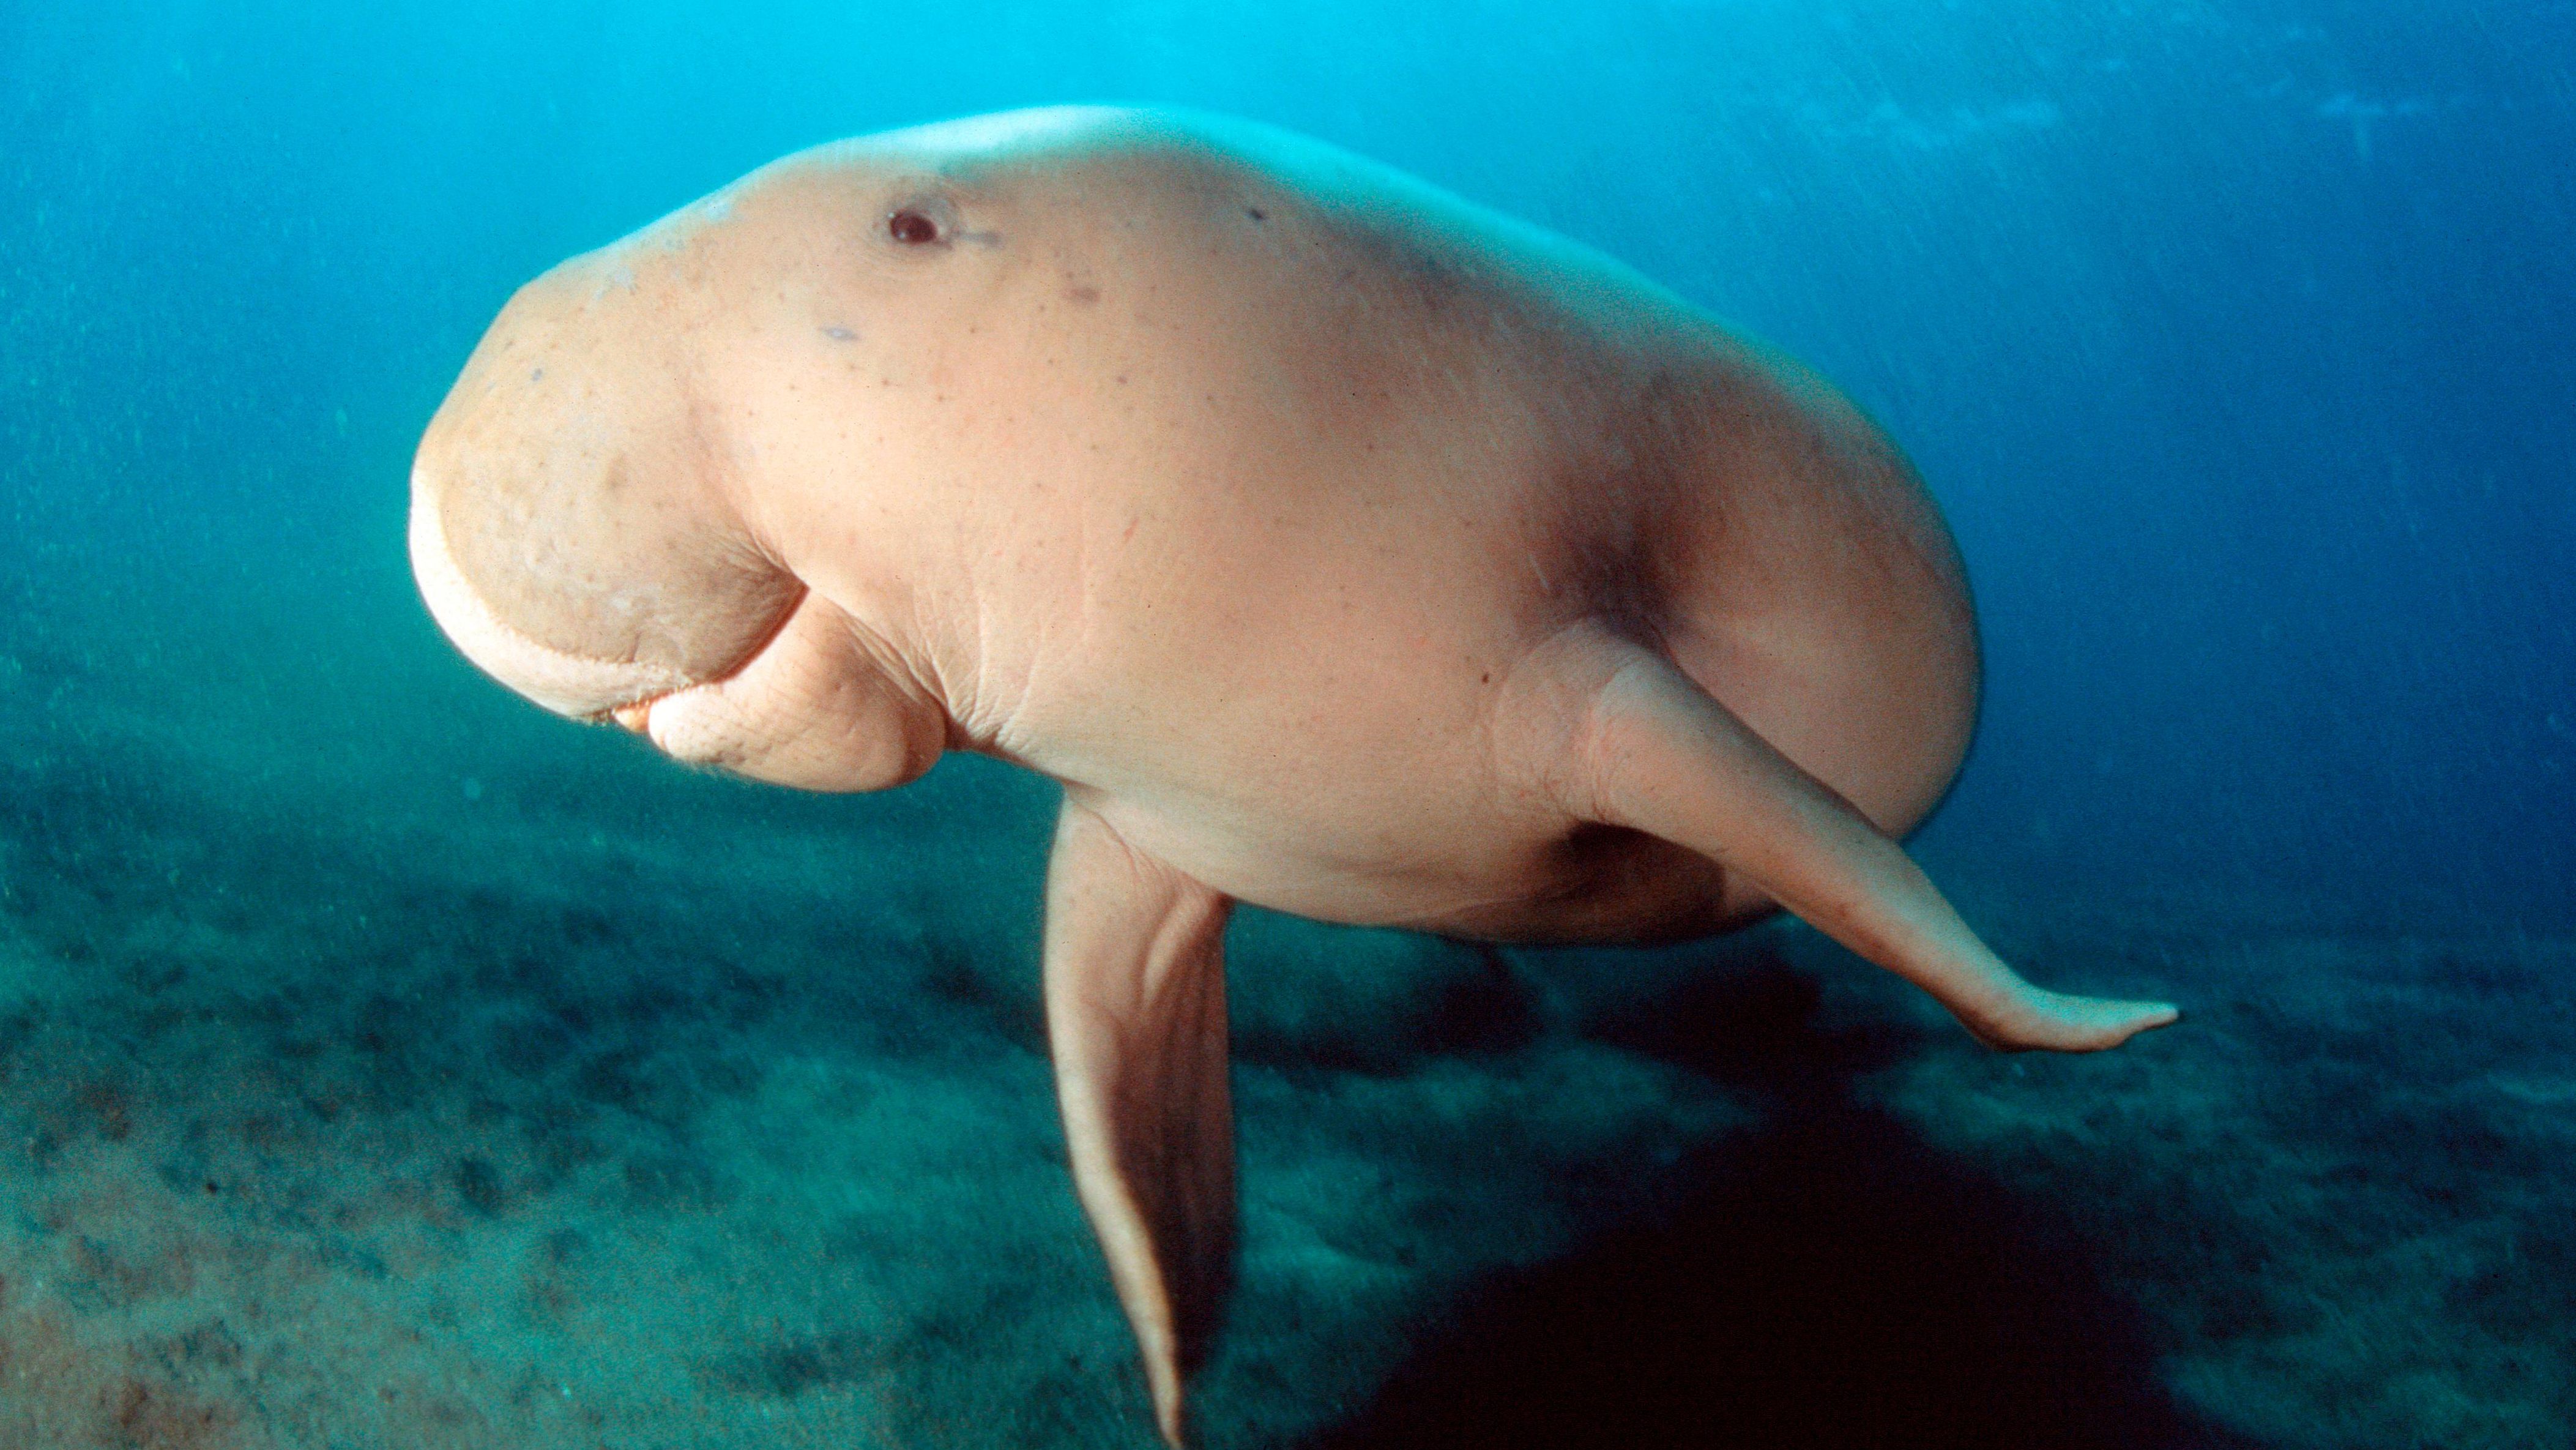 A dugong in Indonesian waters. The species is listed as vulnerable by the International Union for Conservation of Nature.